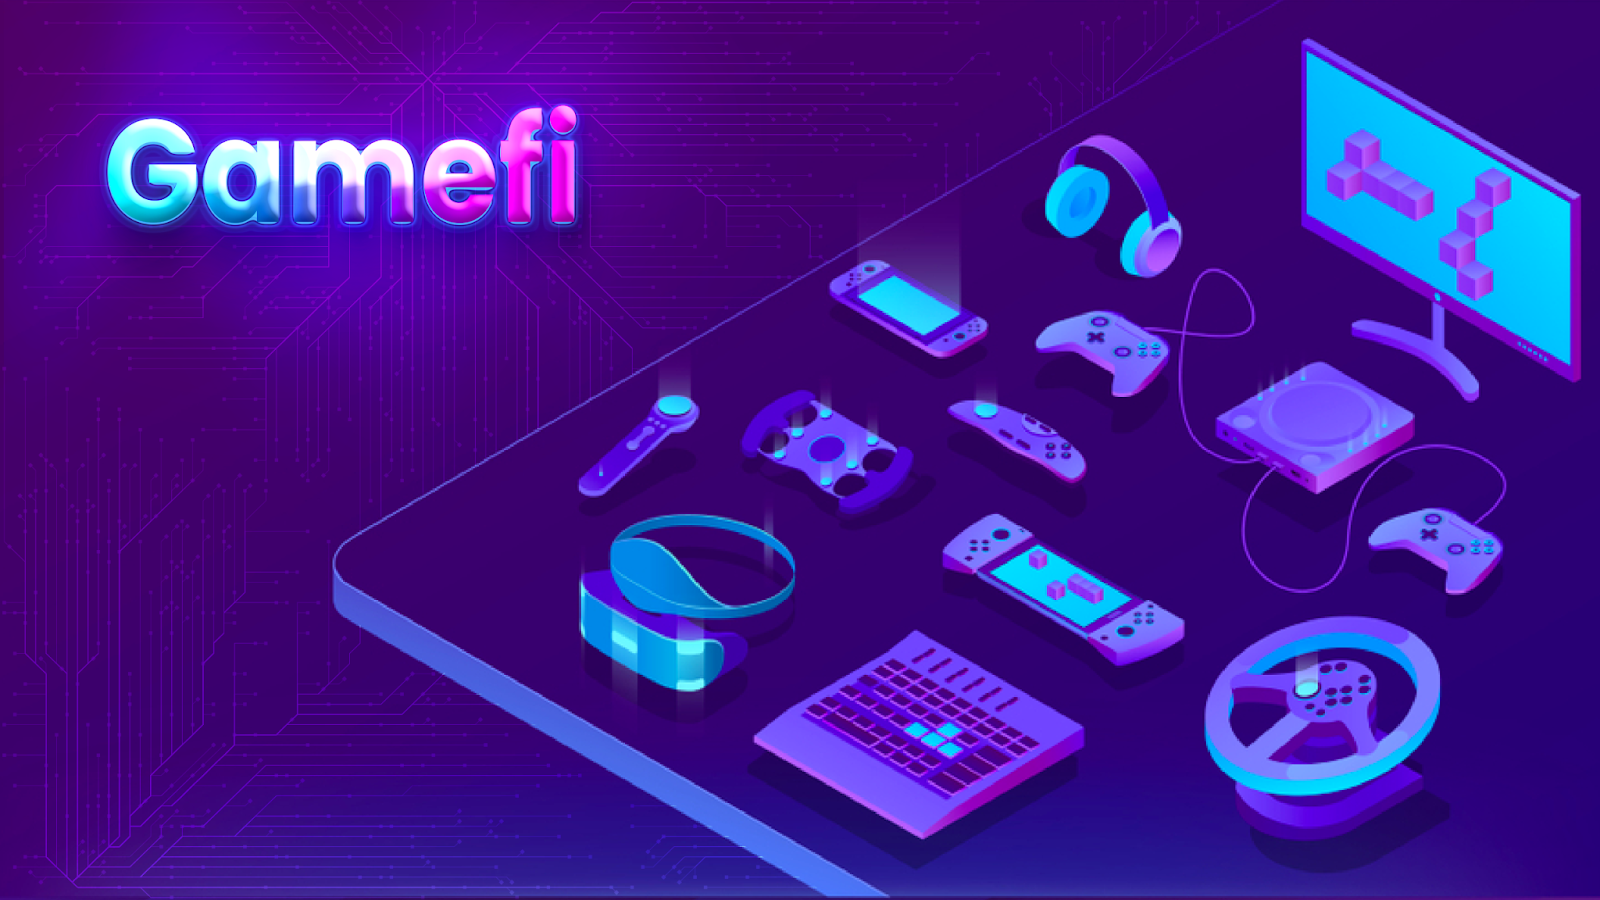 What you need to find in a good gamefi developer